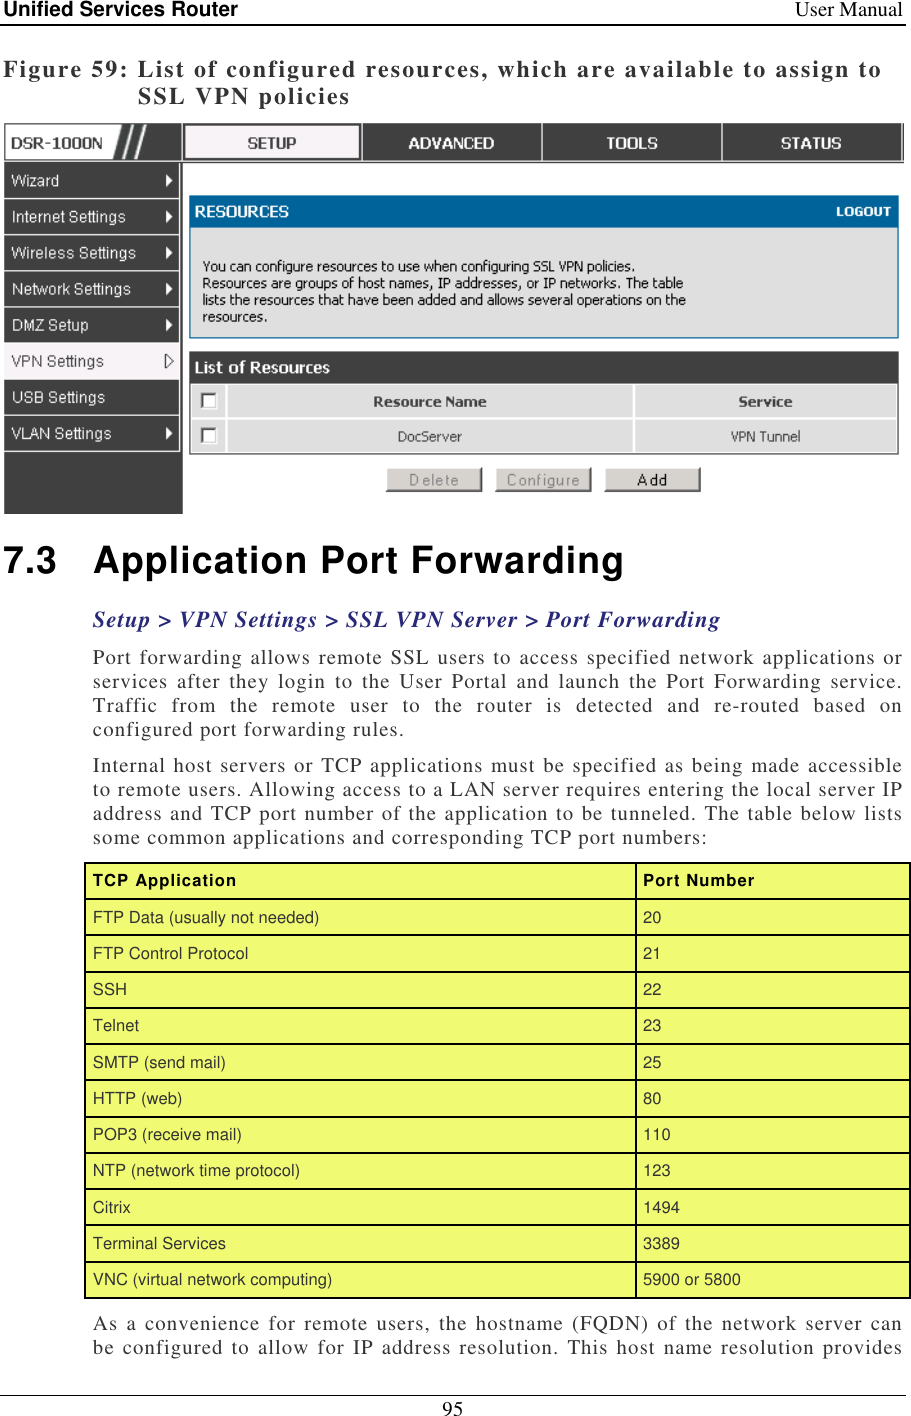 Unified Services Router    User Manual 95  Figure 59: List of configured resources, which are available to assign to SSL VPN policies  7.3  Application Port Forwarding Setup &gt; VPN Settings &gt; SSL VPN Server &gt; Port Forwarding  Port forwarding allows remote SSL users to access specified network applications or services  after  they  login  to  the  User  Portal  and  launch  the  Port  Forwarding  service. Traffic  from  the  remote  user  to  the  router  is  detected  and  re-routed  based  on configured port forwarding rules.  Internal host servers or TCP applications must be specified as being made accessible to remote users. Allowing access to a LAN server requires entering the local server IP address and TCP port number of the application to be tunneled. The table below lists some common applications and corresponding TCP port numbers:  TCP Application  Port Number FTP Data (usually not needed)   20 FTP Control Protocol   21 SSH   22 Telnet   23 SMTP (send mail)   25 HTTP (web)   80 POP3 (receive mail)   110 NTP (network time protocol)   123 Citrix   1494 Terminal Services   3389 VNC (virtual network computing)   5900 or 5800 As a  convenience for  remote  users,  the  hostname (FQDN)  of  the network  server  can be configured to  allow  for IP  address resolution. This  host  name resolution provides 